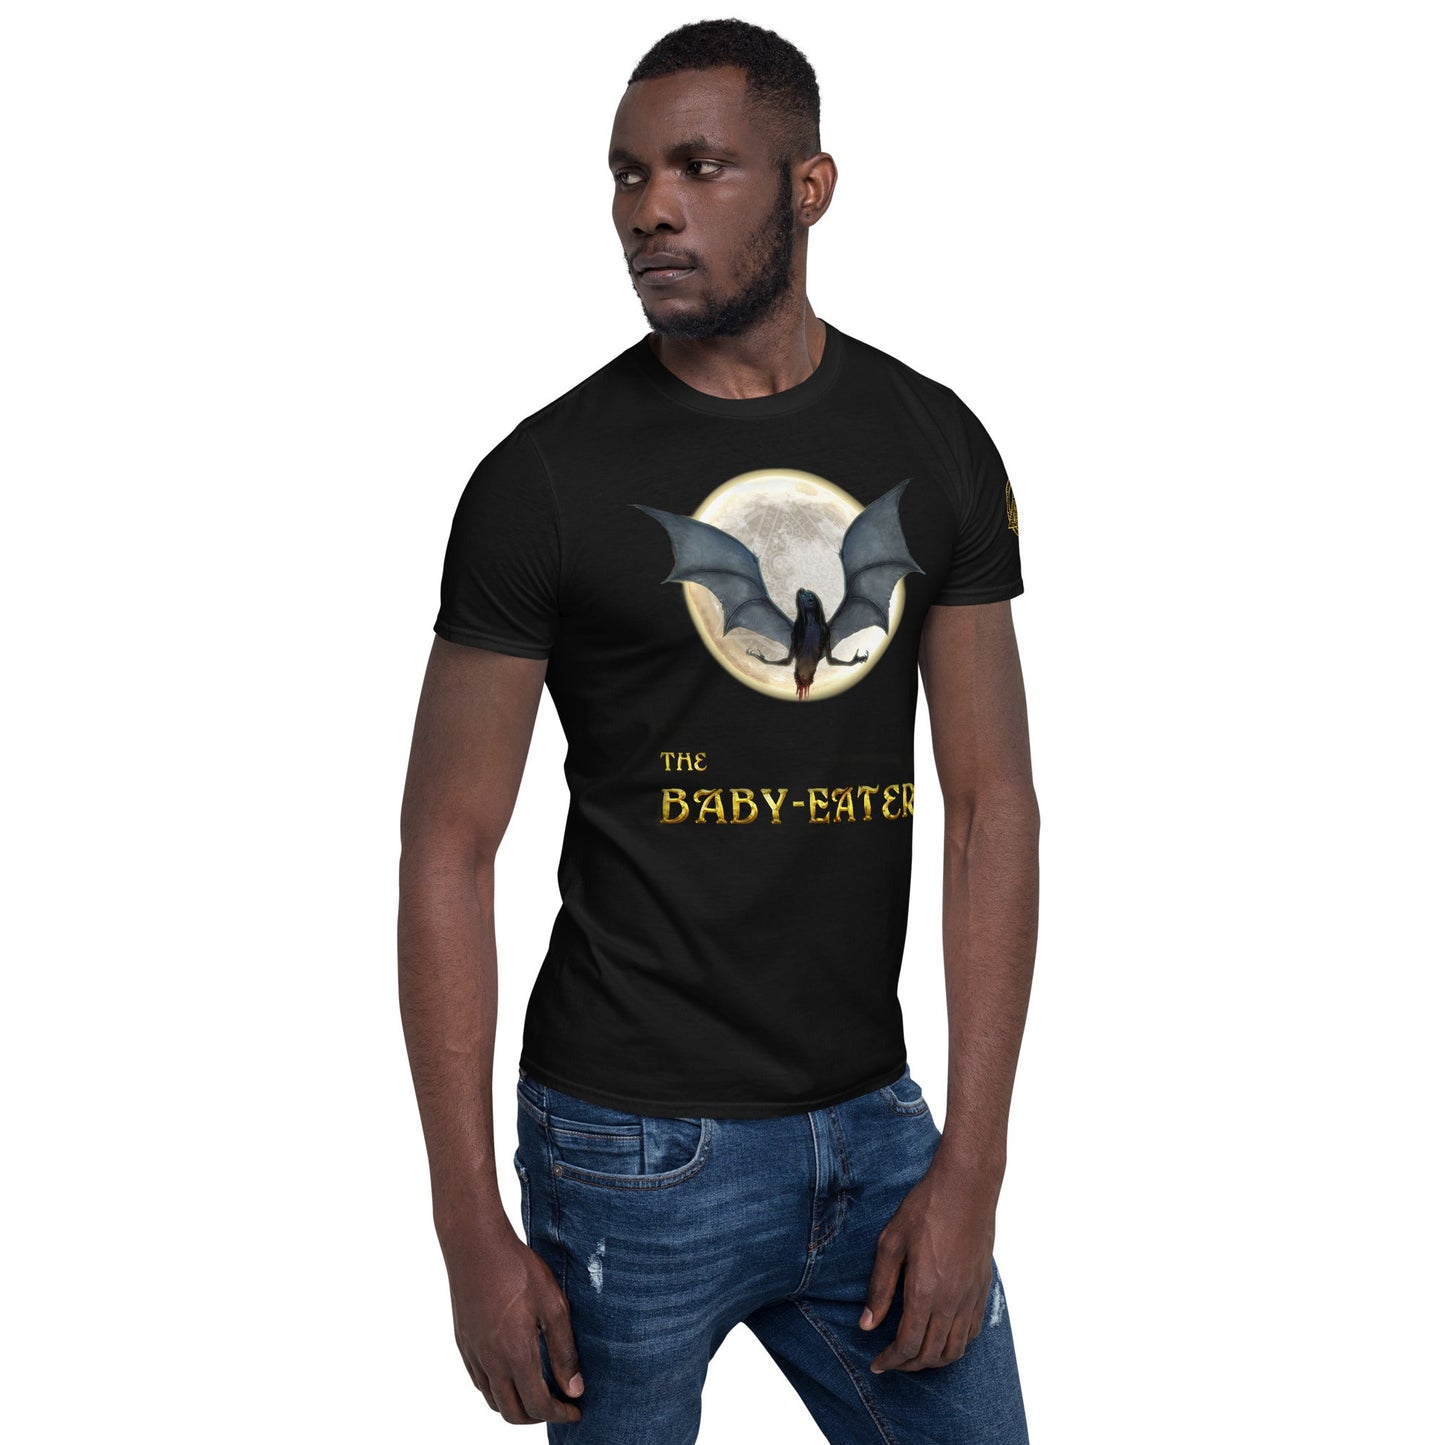 Short-Sleeve Unisex T-Shirt | The Baby-Eater | Awards and Reviews - Spectral Ink Shop - Shirts & Tops -9003386_474